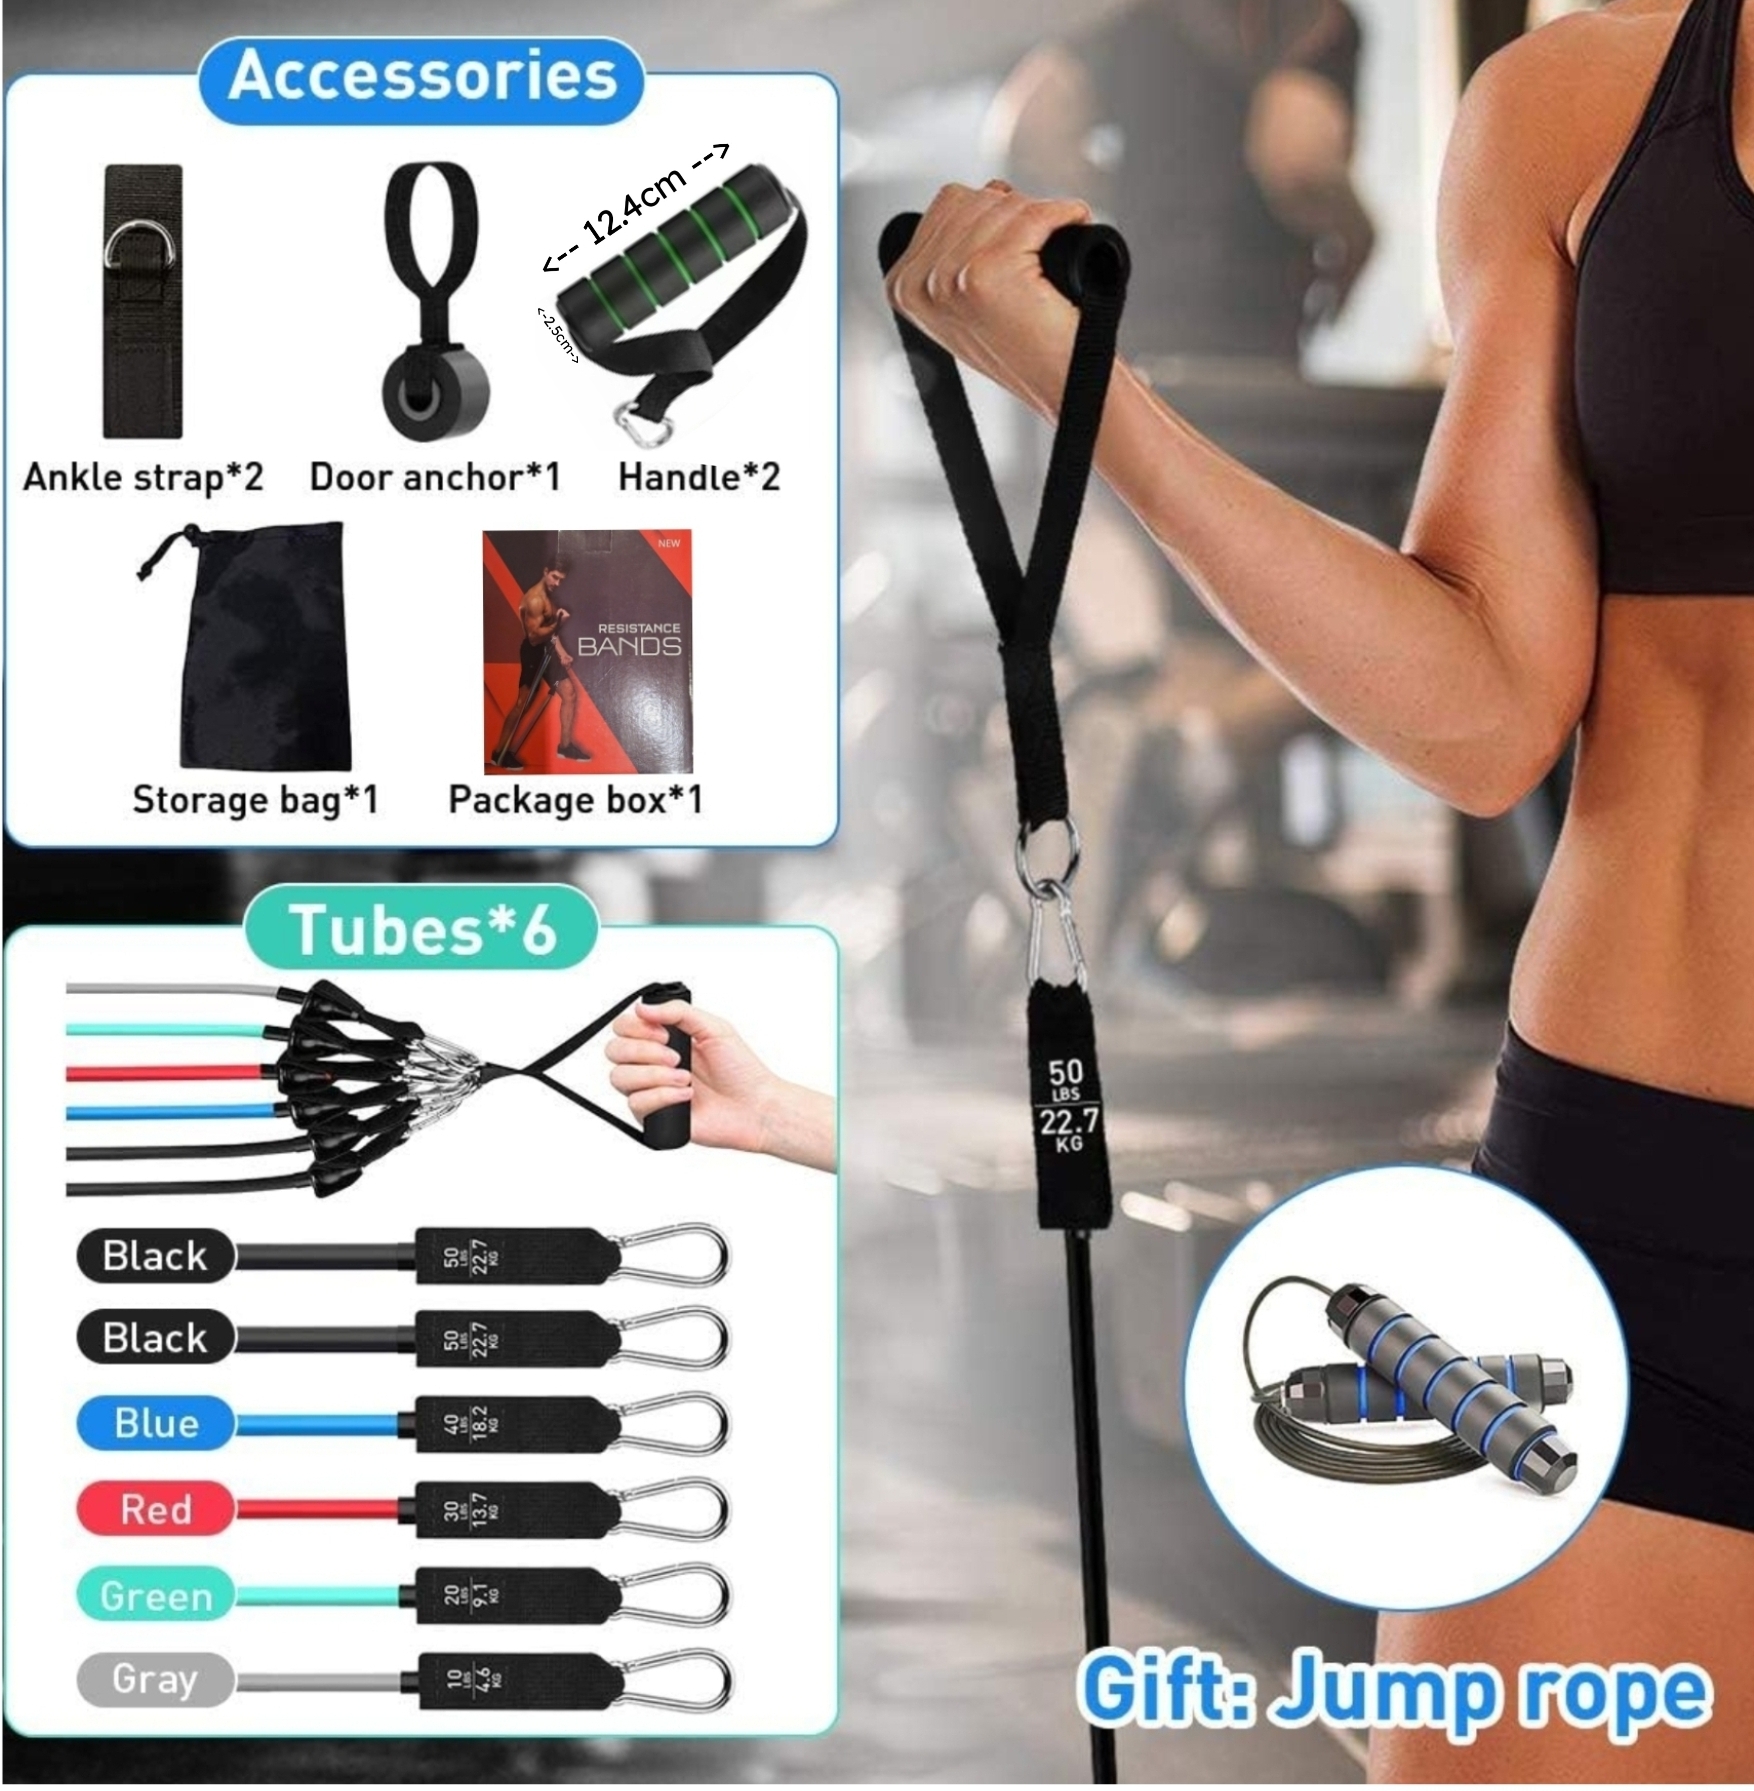 CORNMI: Heavy Duty Unisex Resistance Bands 200lbs Exercise Set + A Free High Quality Skipping Rope Included